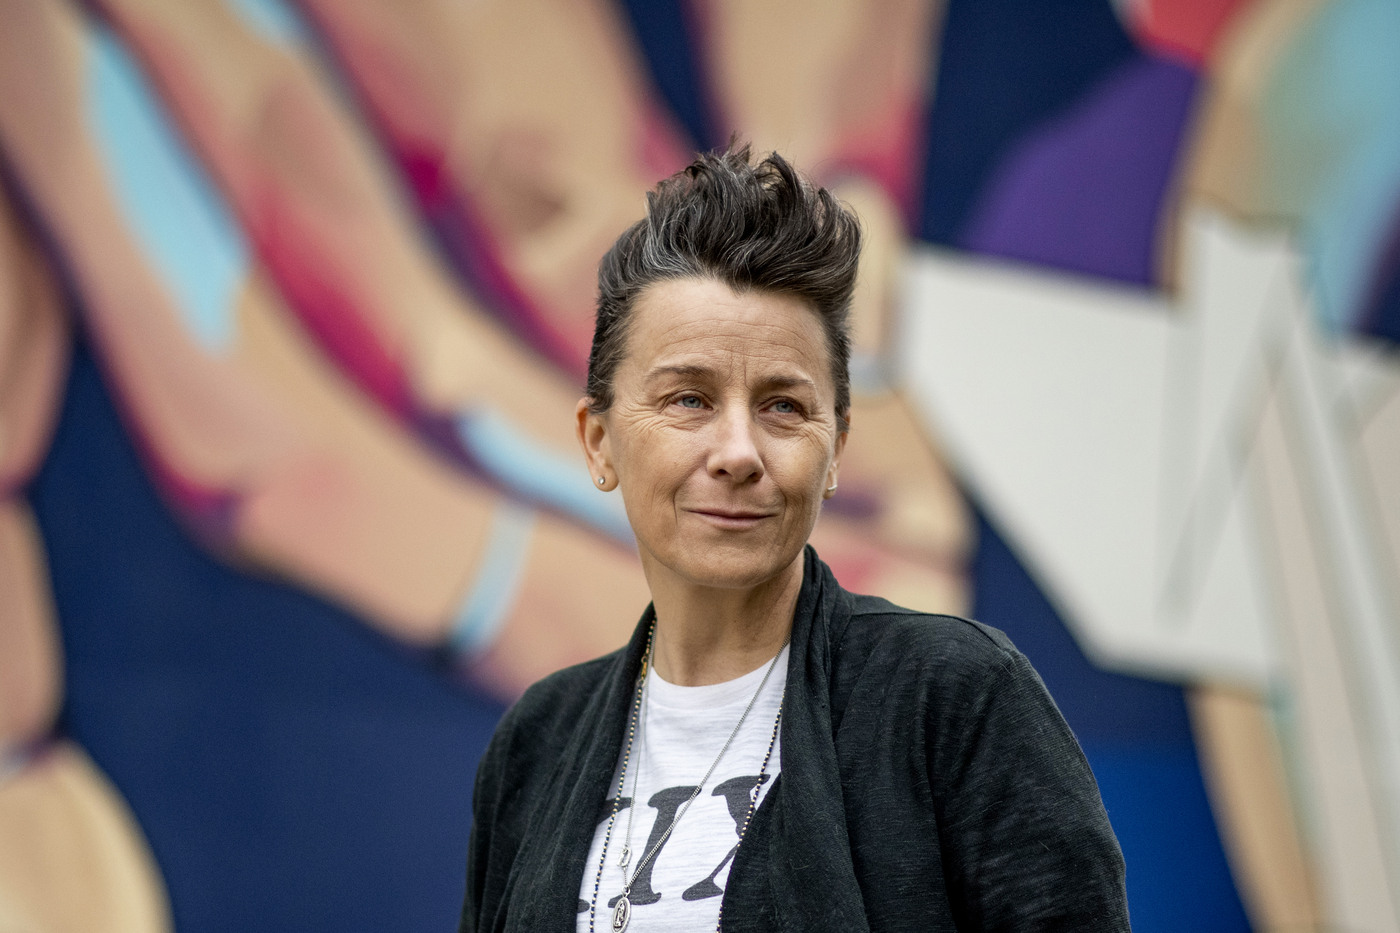 melissa ferrick stands in front of a mural